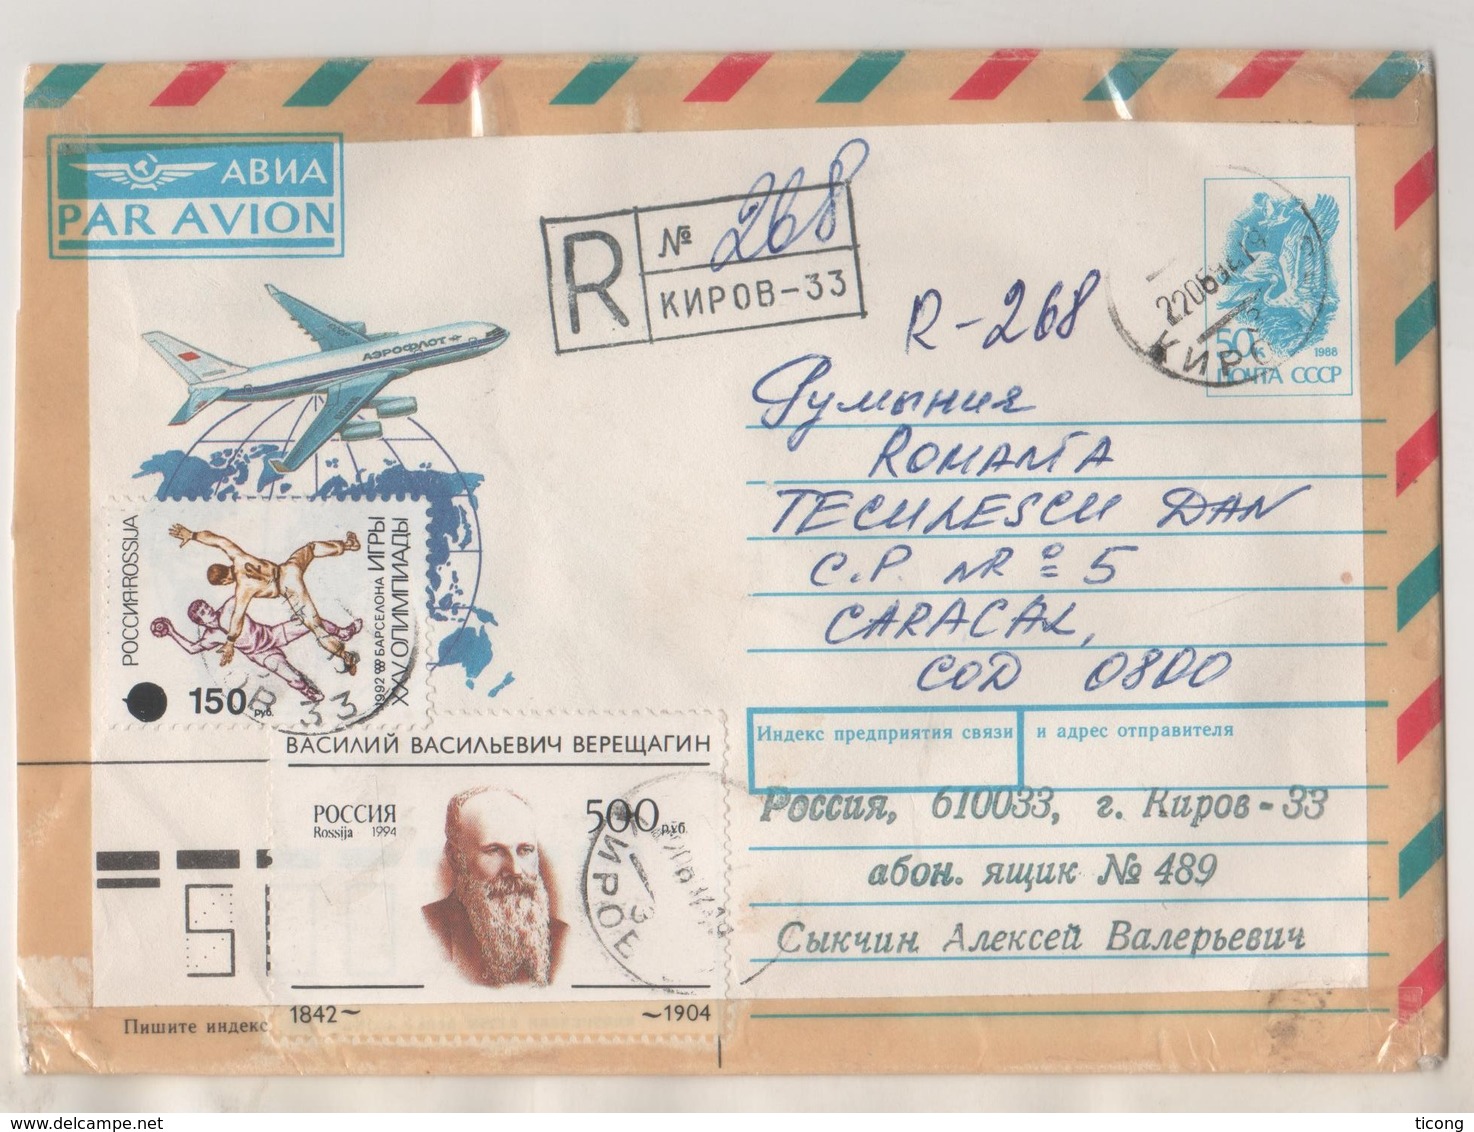 RUSSIE LETTRE RECOMMANDEE ENTIER POSTAL POUR LA ROUMANIE 1994 - TIMBRE HANDBALL SURCHARGE 150 - DOCUMENT AYANT VOYAGE - Errors & Oddities